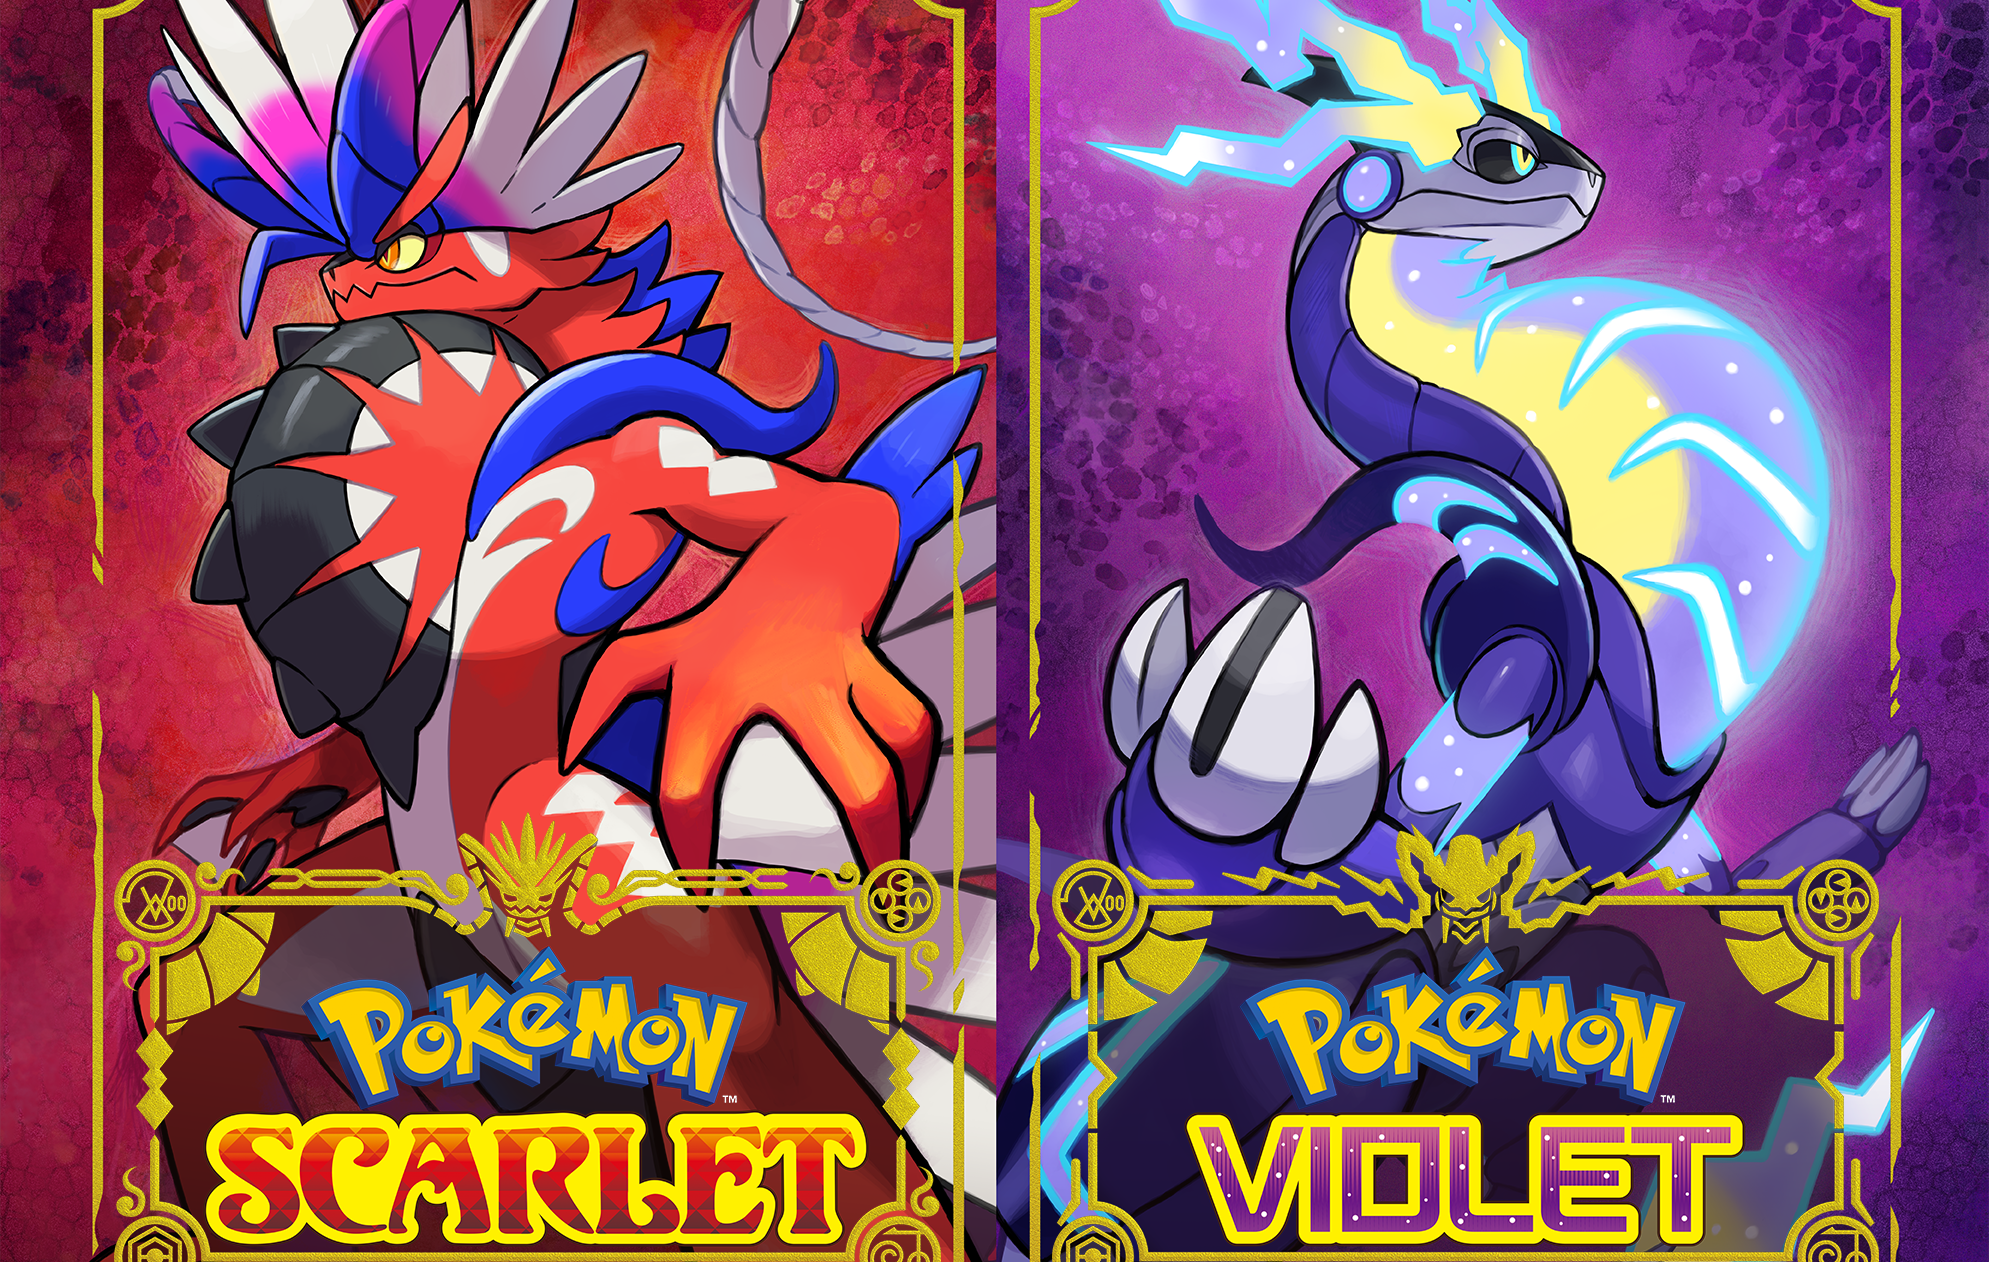 How many Pokémon are there in 'Pokémon Scarlet and Violet'?